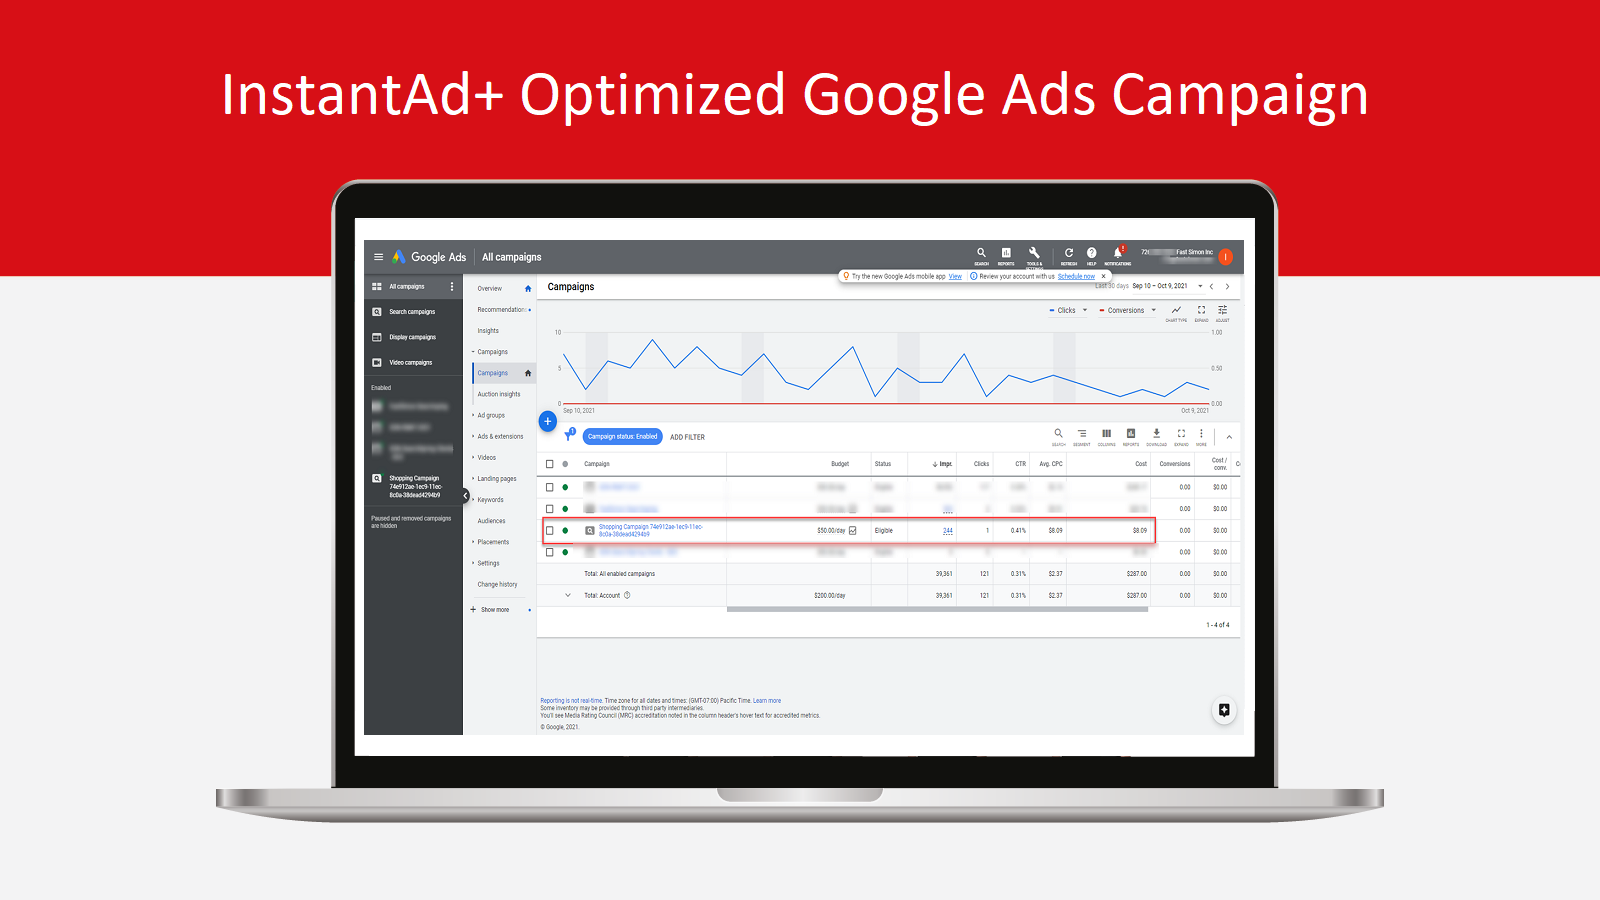 Optimized Google Ads Results